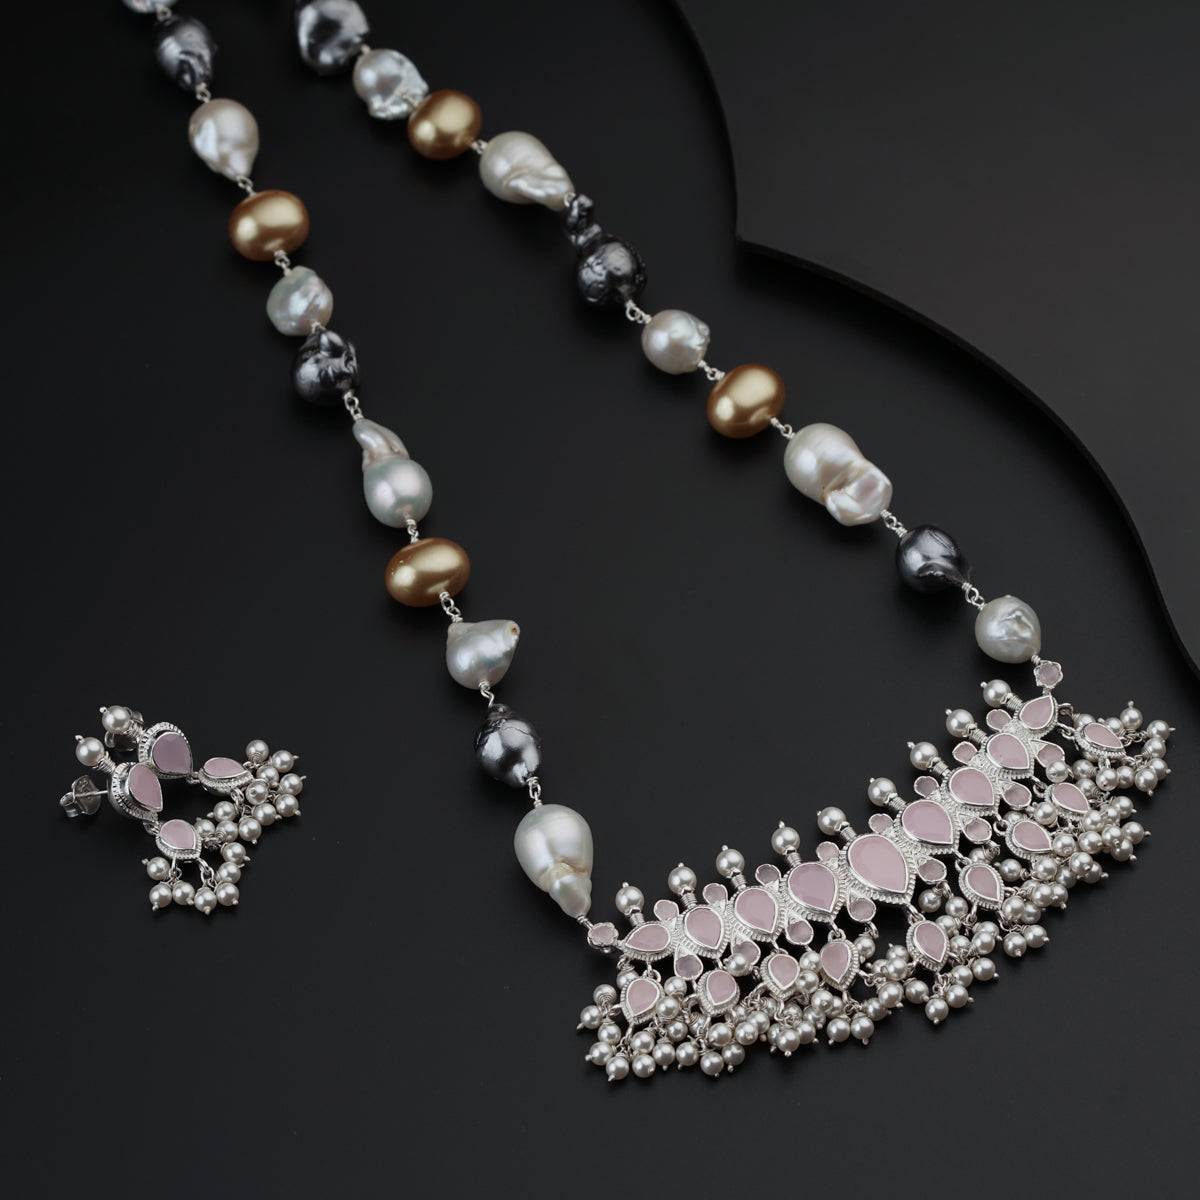 a necklace with pearls and a cross on it